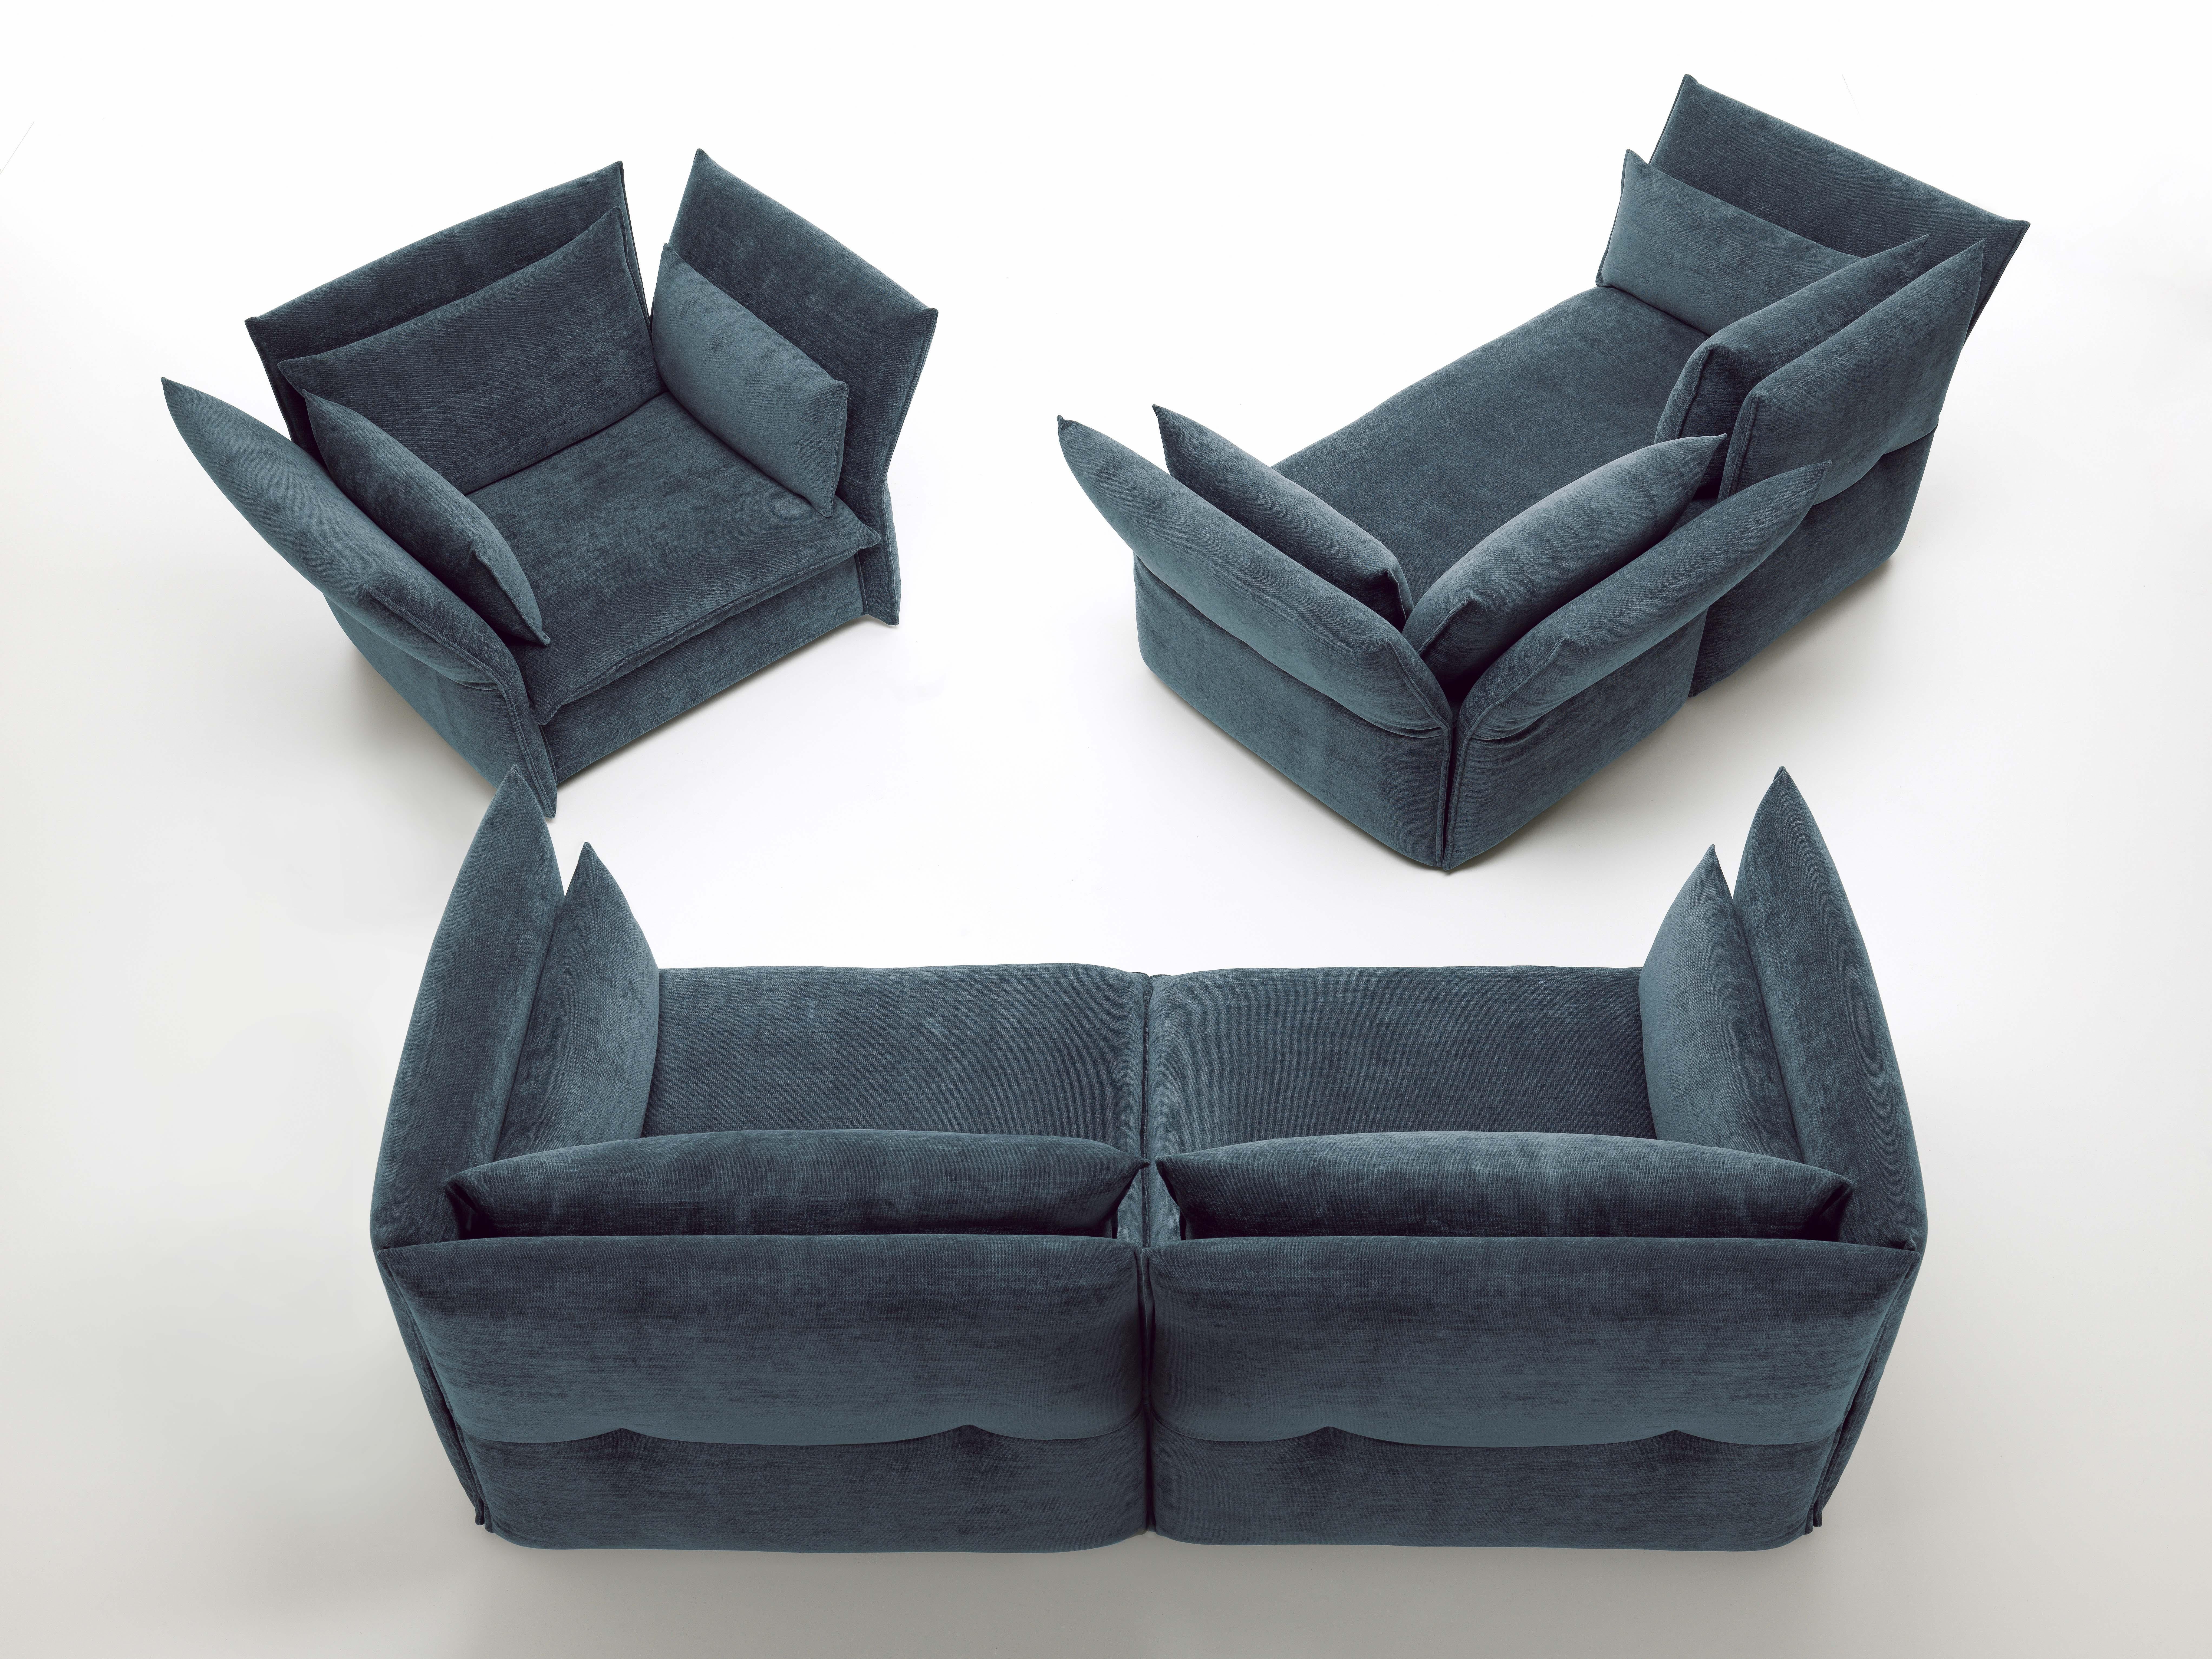 Vitra Mariposa Loveseat in Dark Grey Iroko2 by Edward Barber & Jay Osgerby In New Condition For Sale In New York, NY